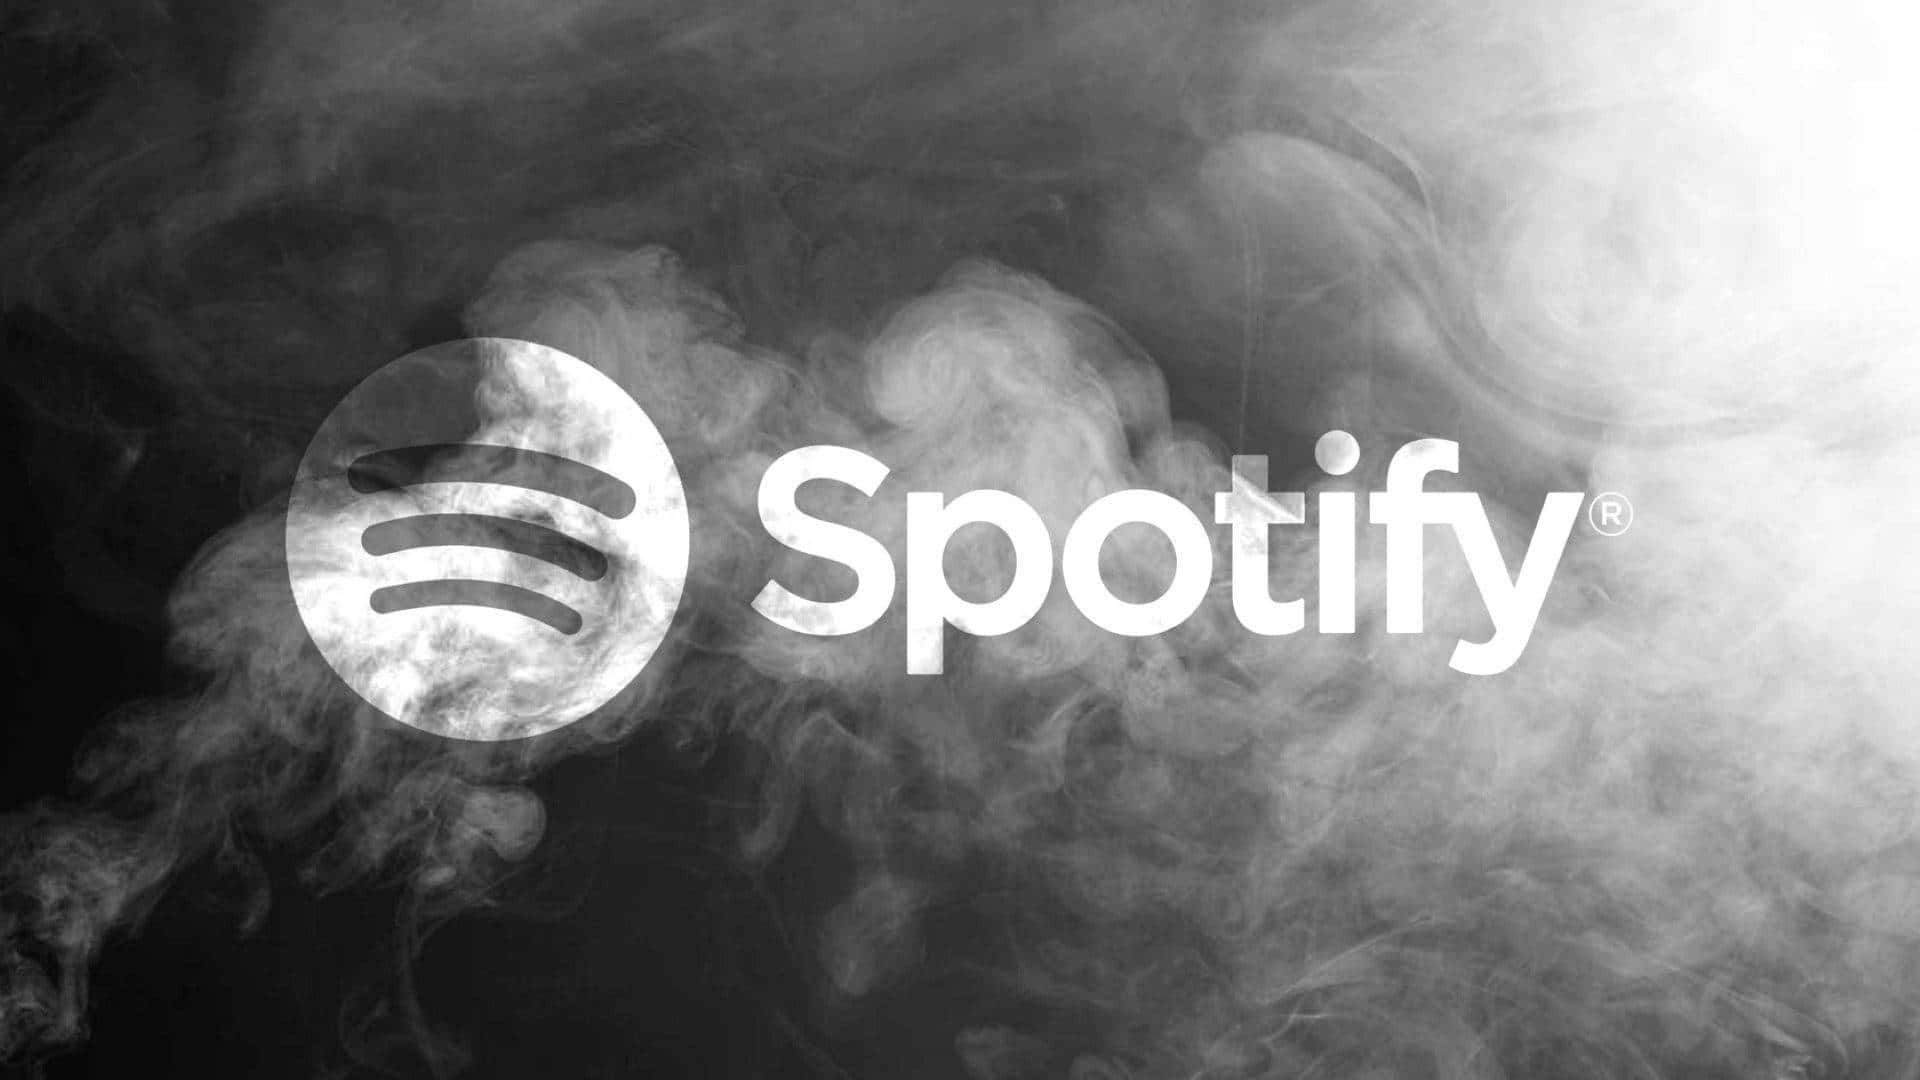 Spotify - A Black And White Image Of The Logo